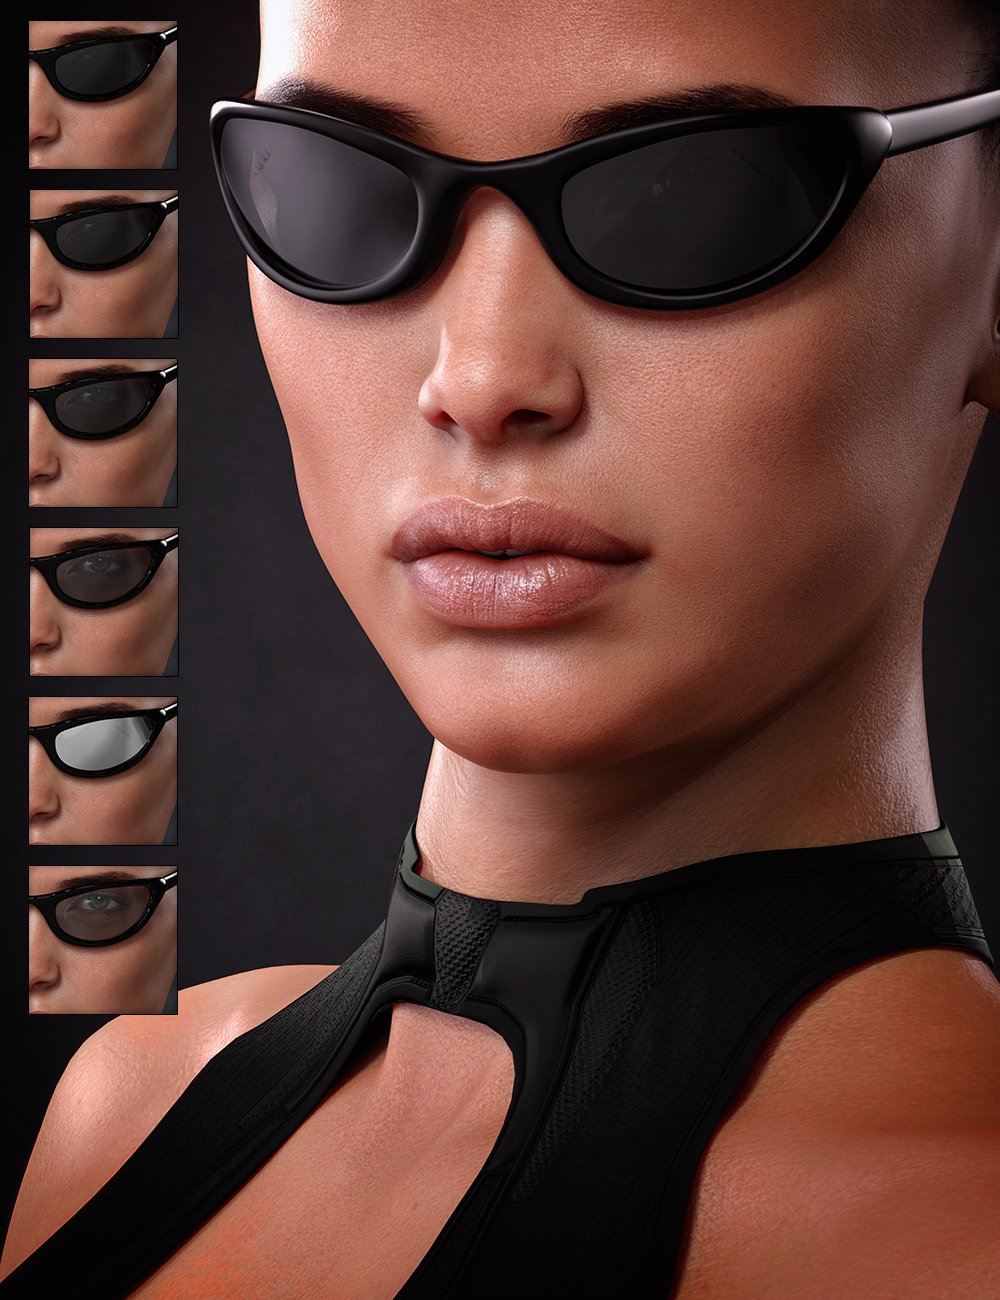 Sunglasses Set 1 for Genesis 8 and 8.1 Males and Females by: Nikisatez, 3D Models by Daz 3D